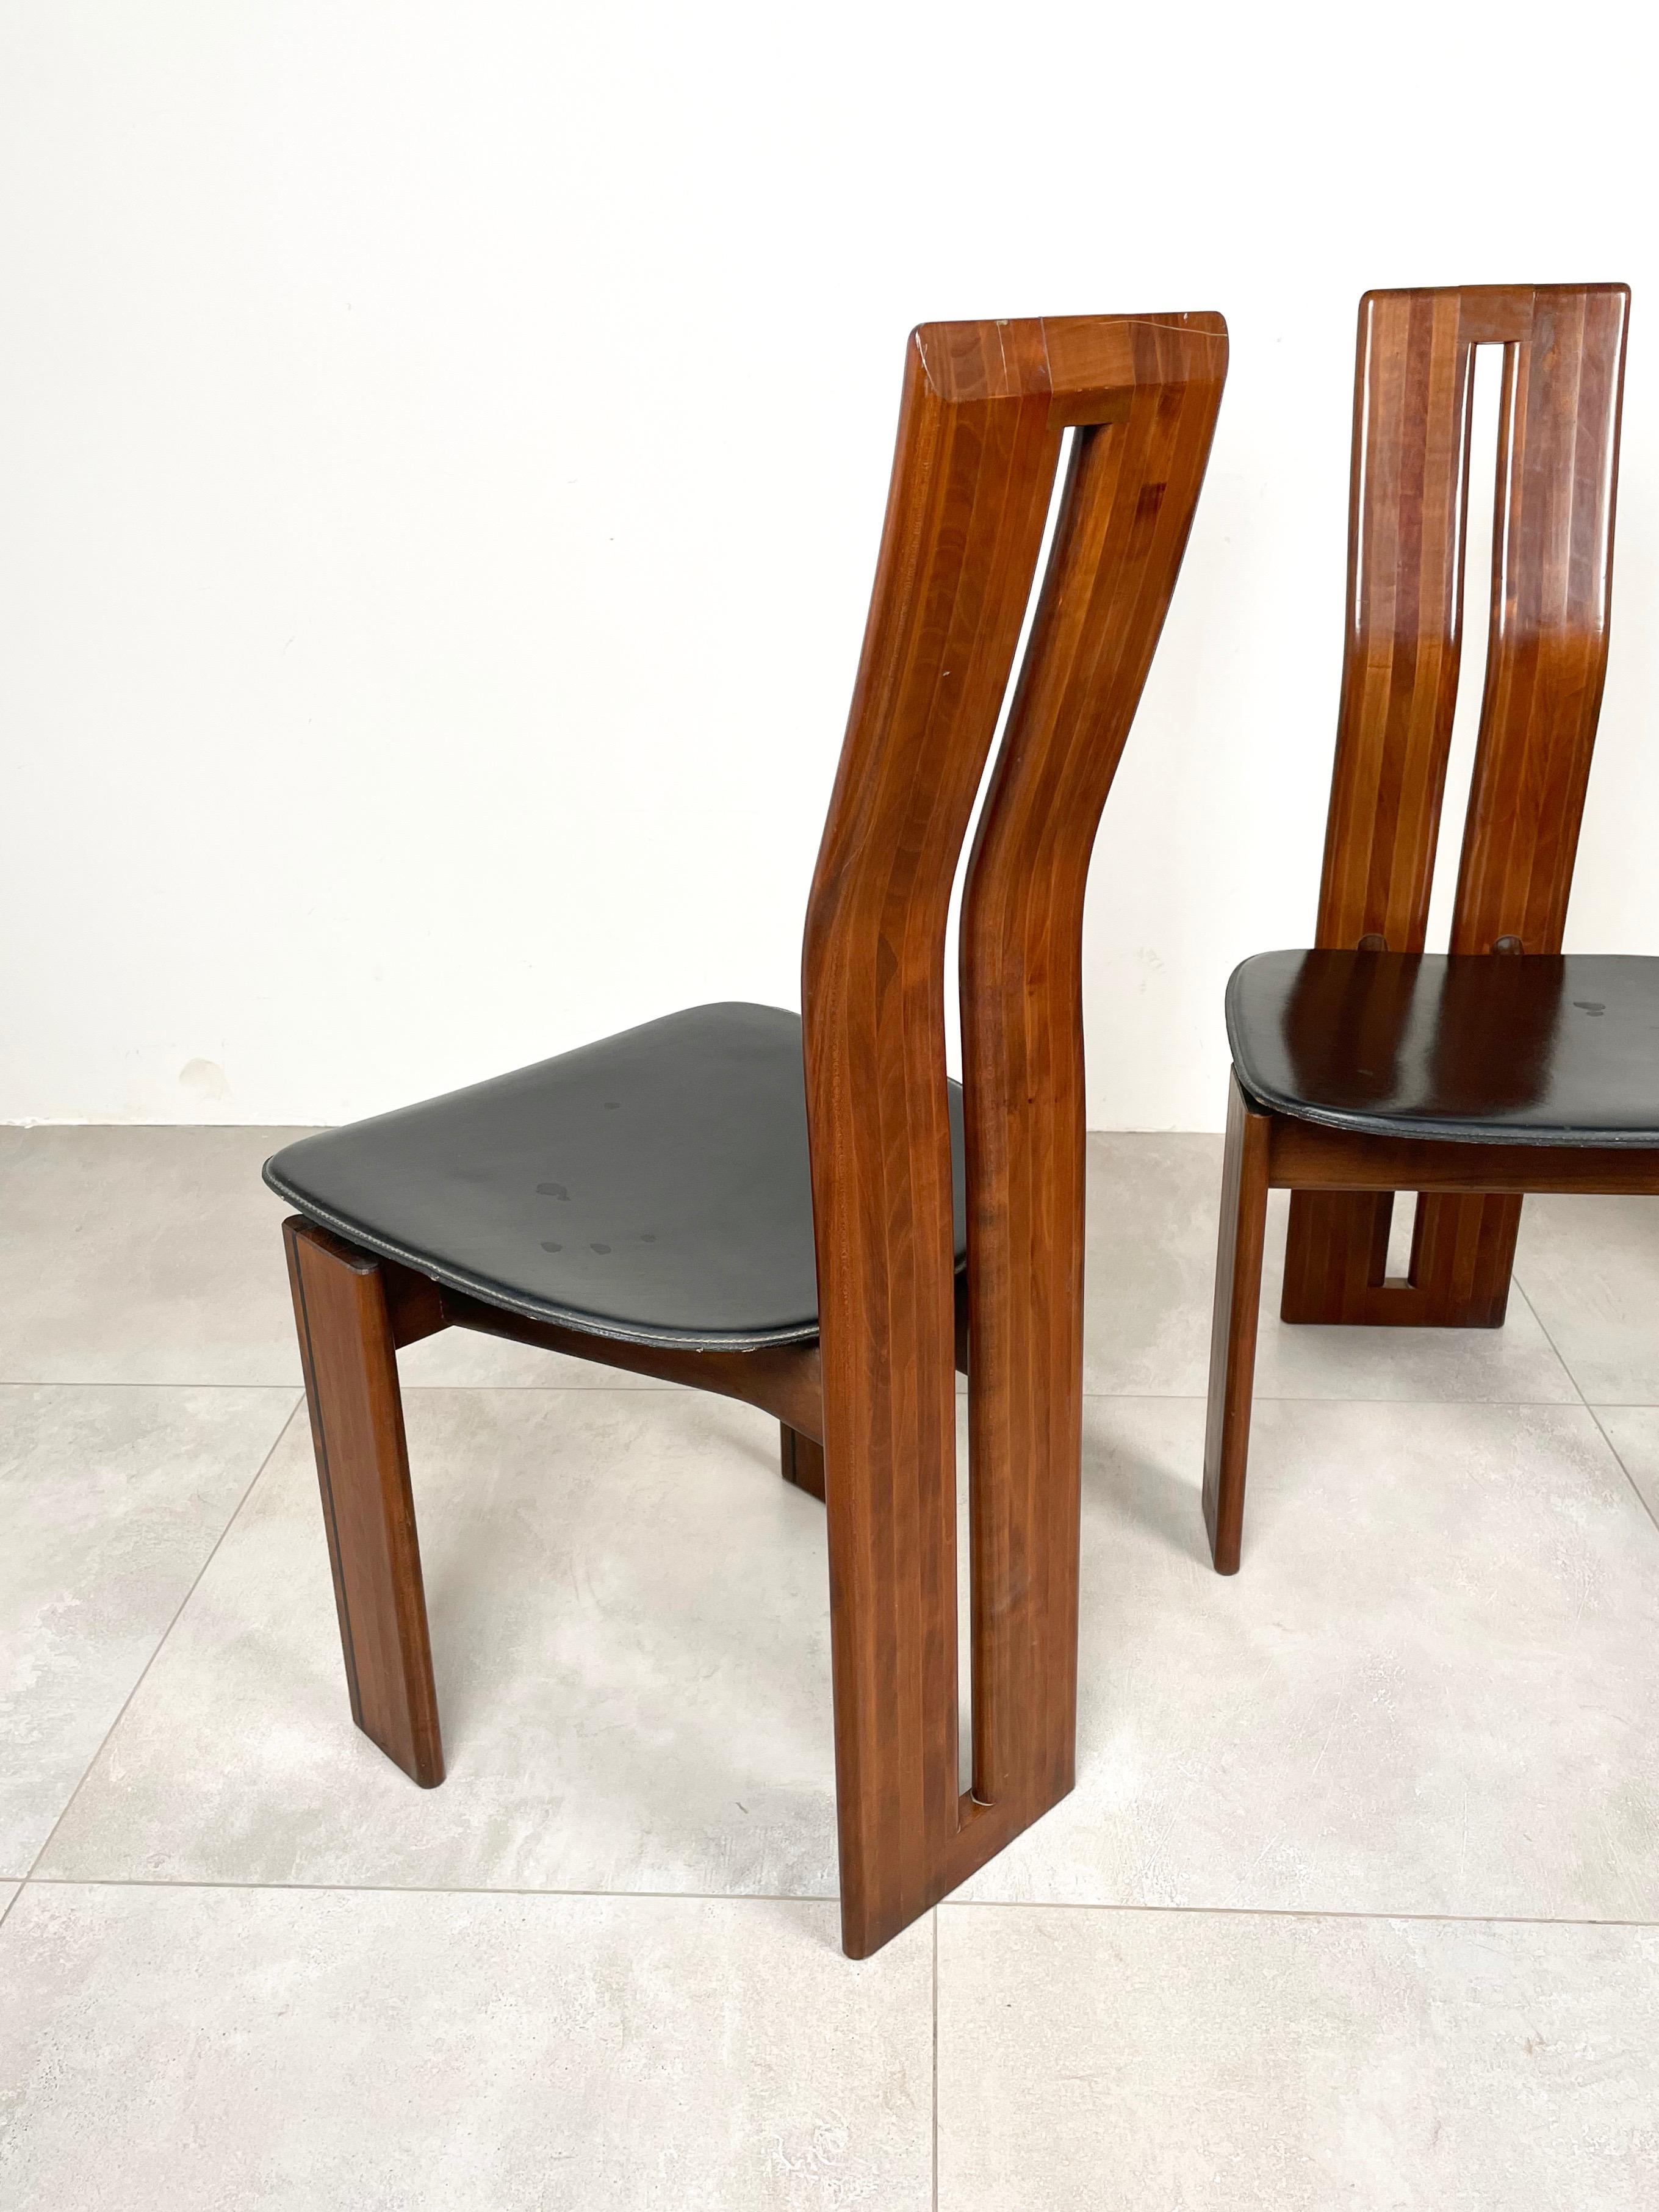 Set of Four Chairs Wood and Leather Mario Marenco for Mobil Girgi, Italy 1970s For Sale 6